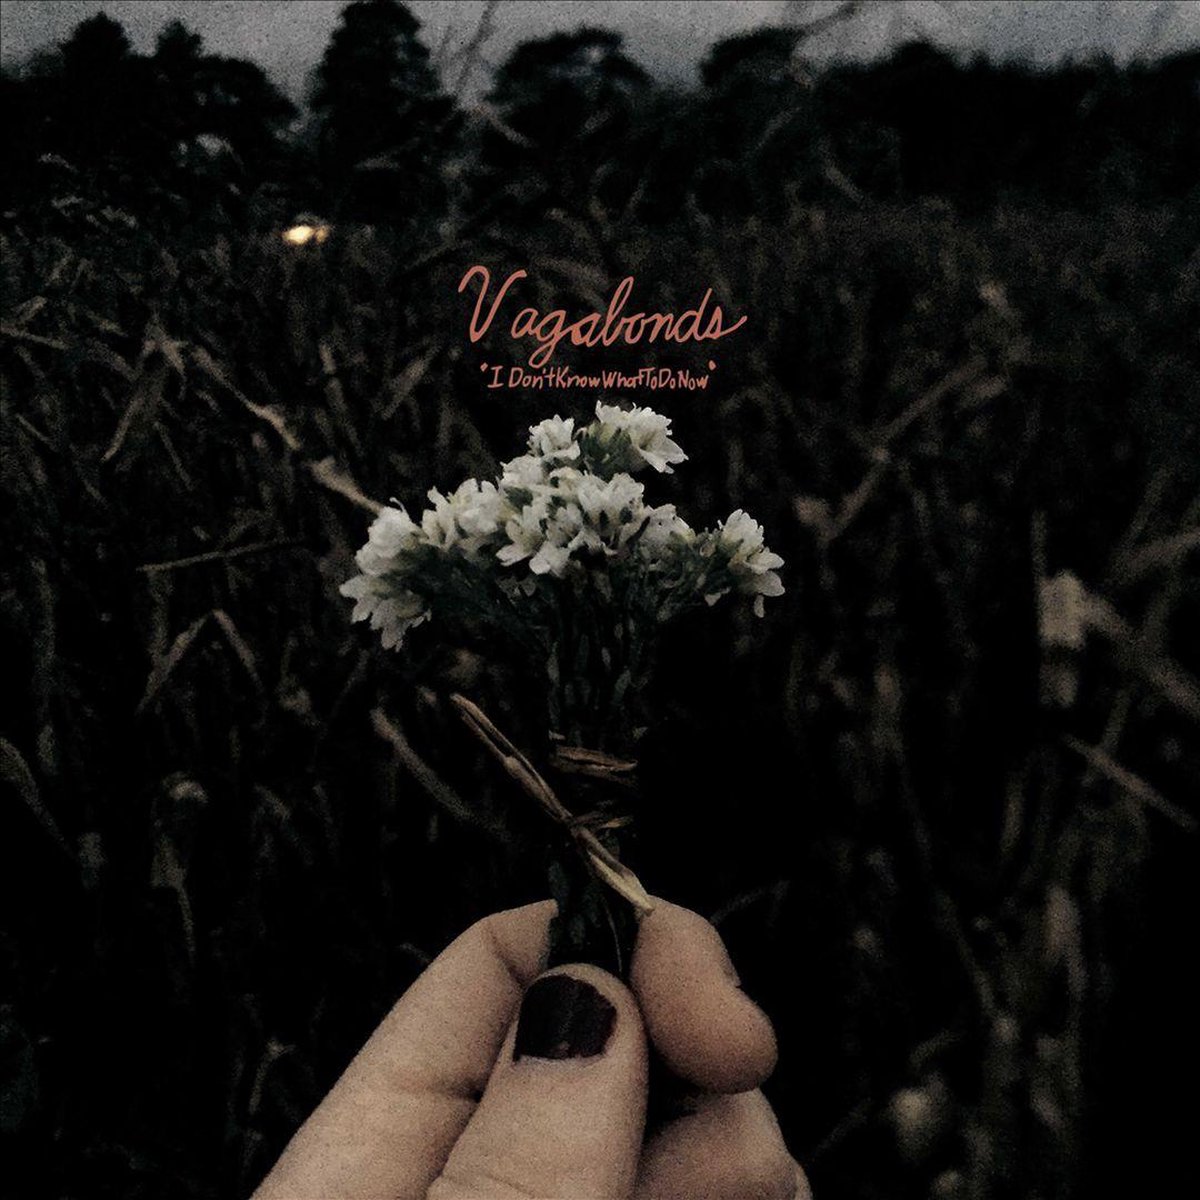 I Don't Know What to Do Now - Vagabonds